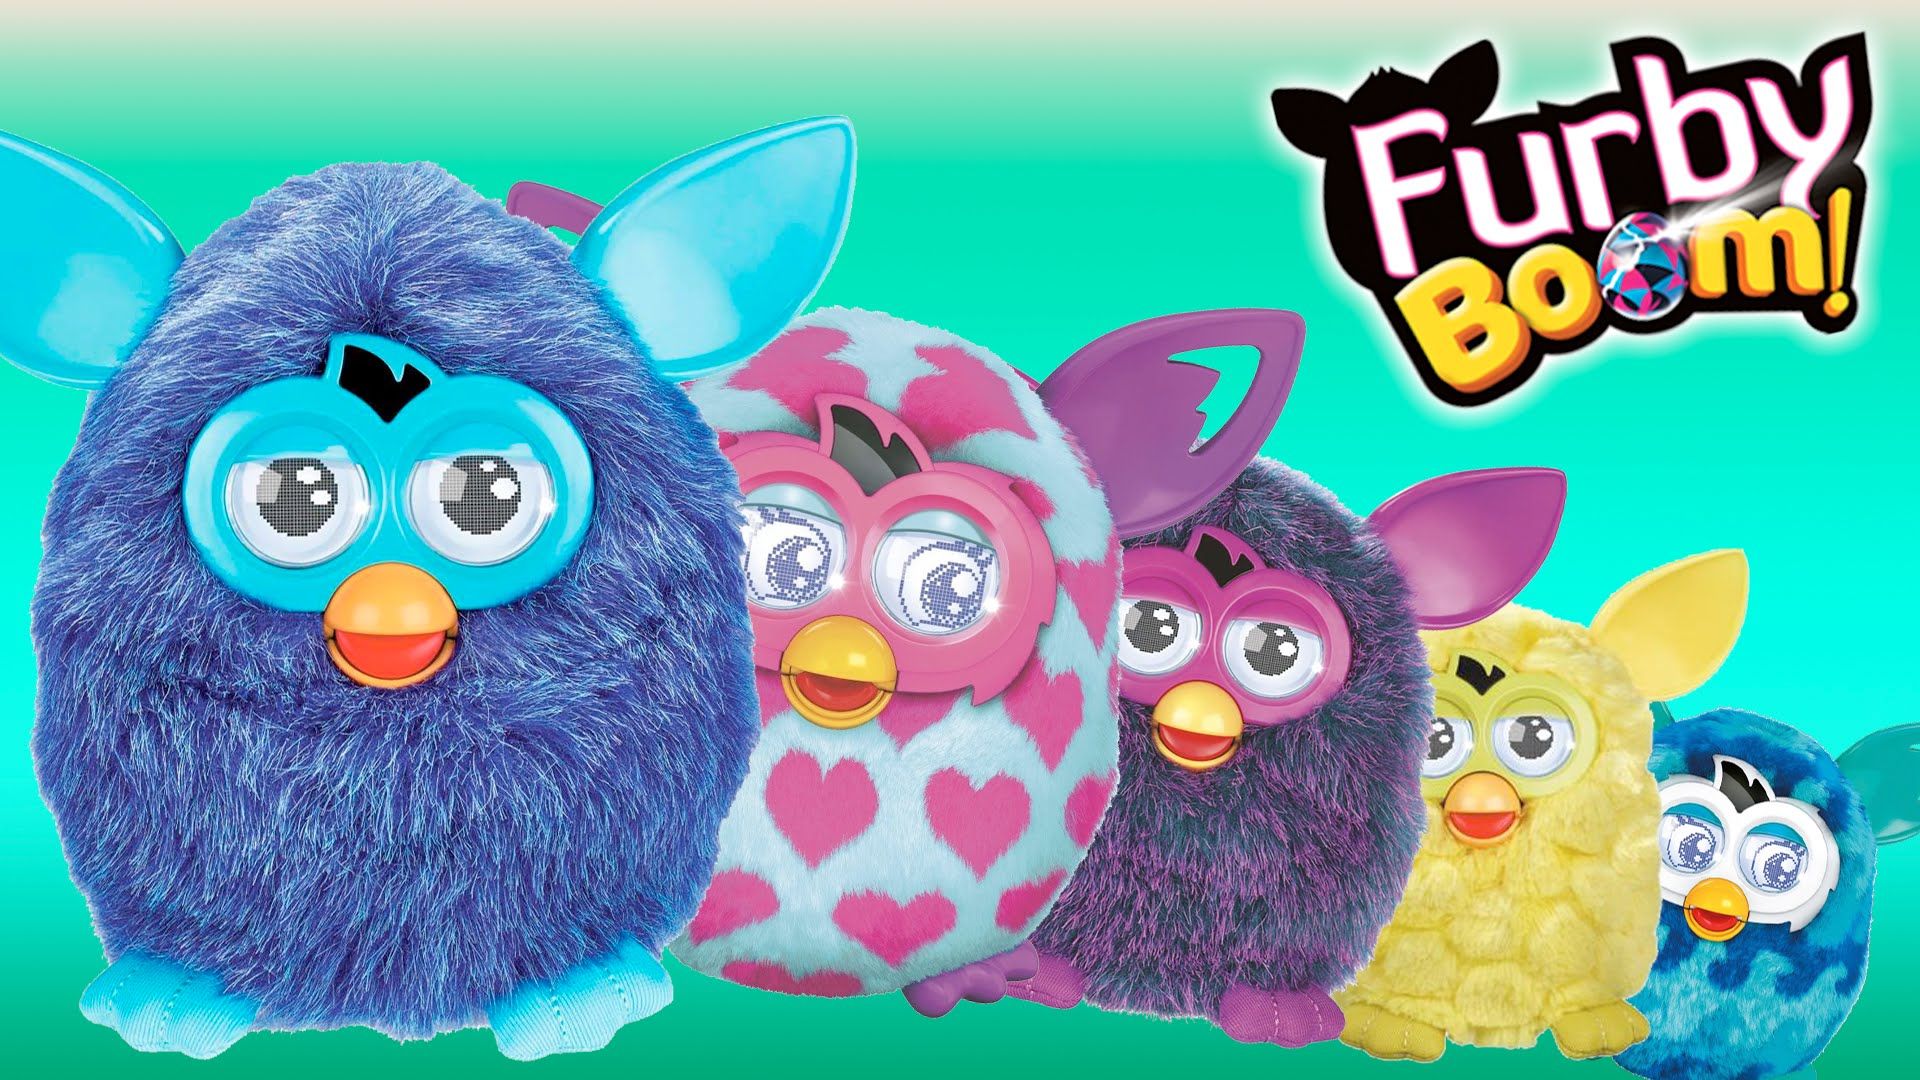 Furby Boom Wallpaper Images - Furby Boom , HD Wallpaper & Backgrounds